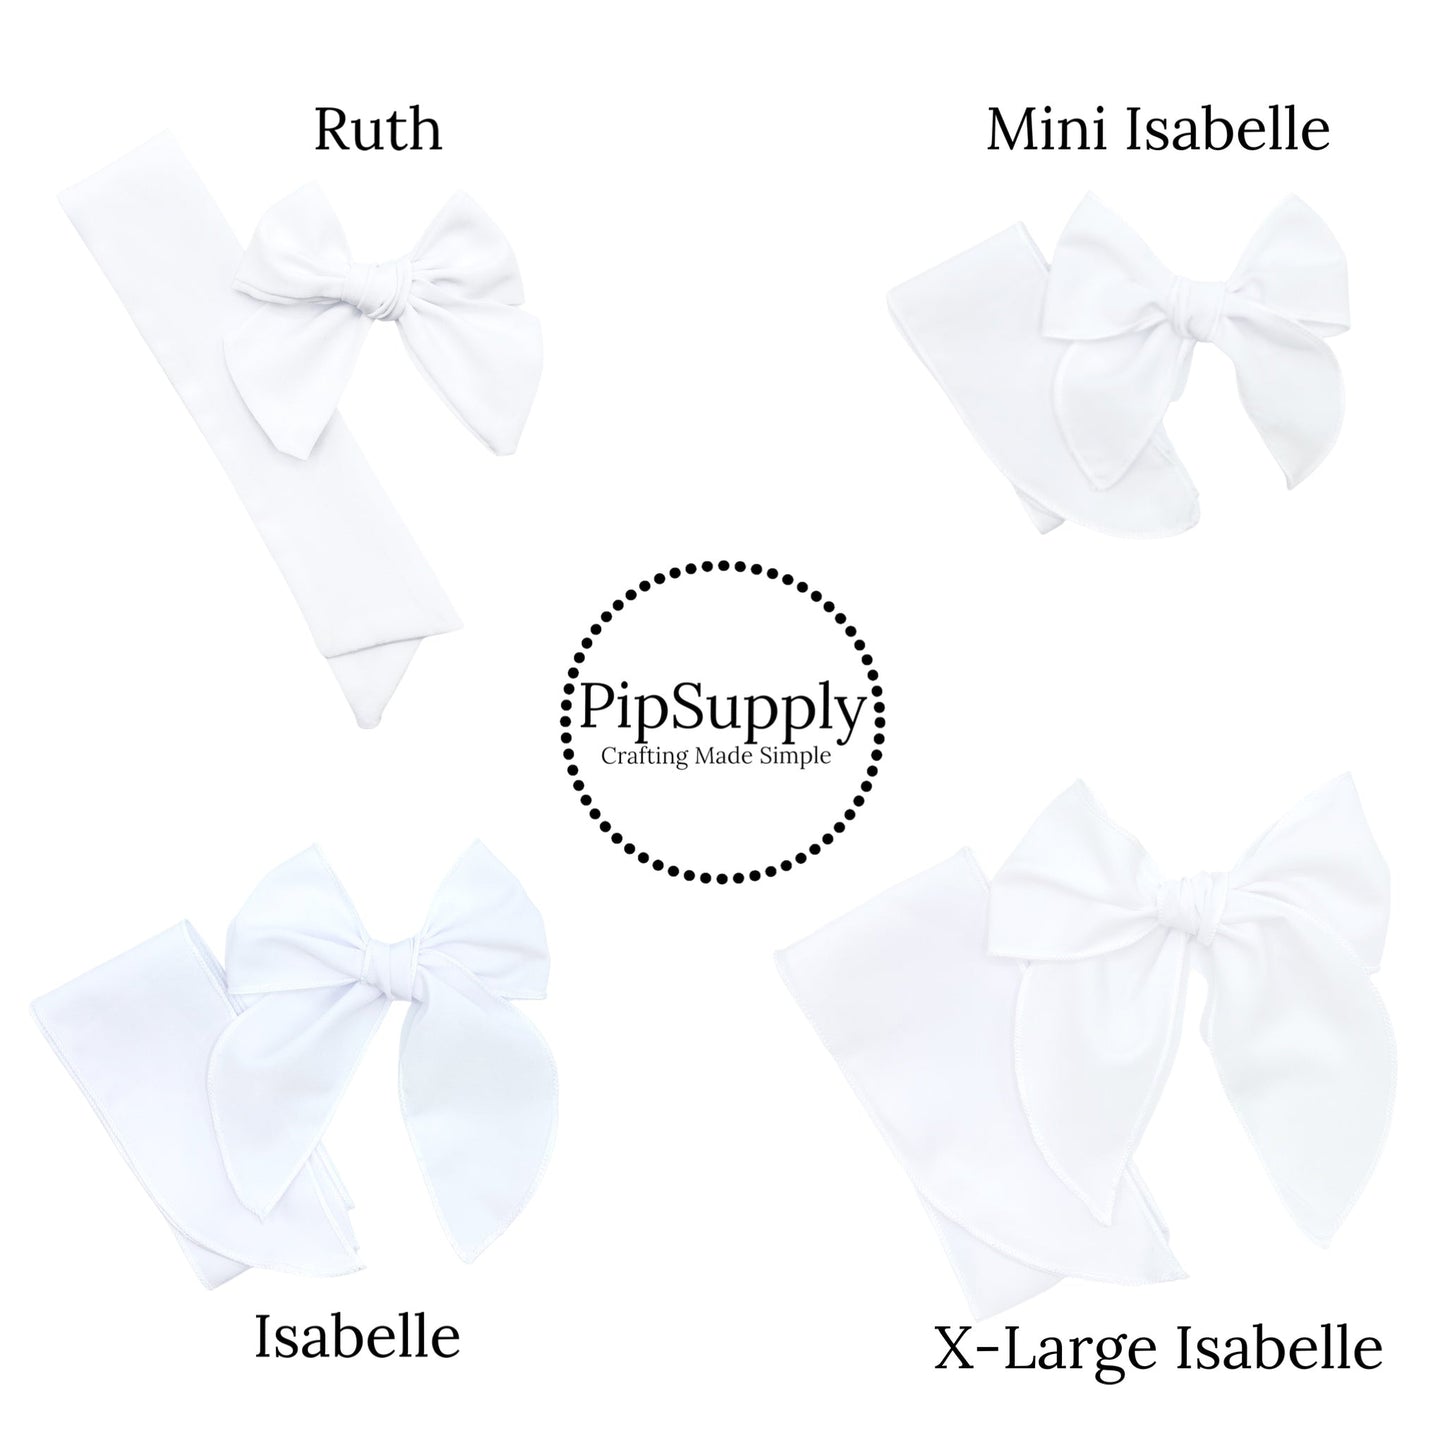 Fairest of All Stripes Princess Hair Bow Strips - PIPS EXLCUSIVE